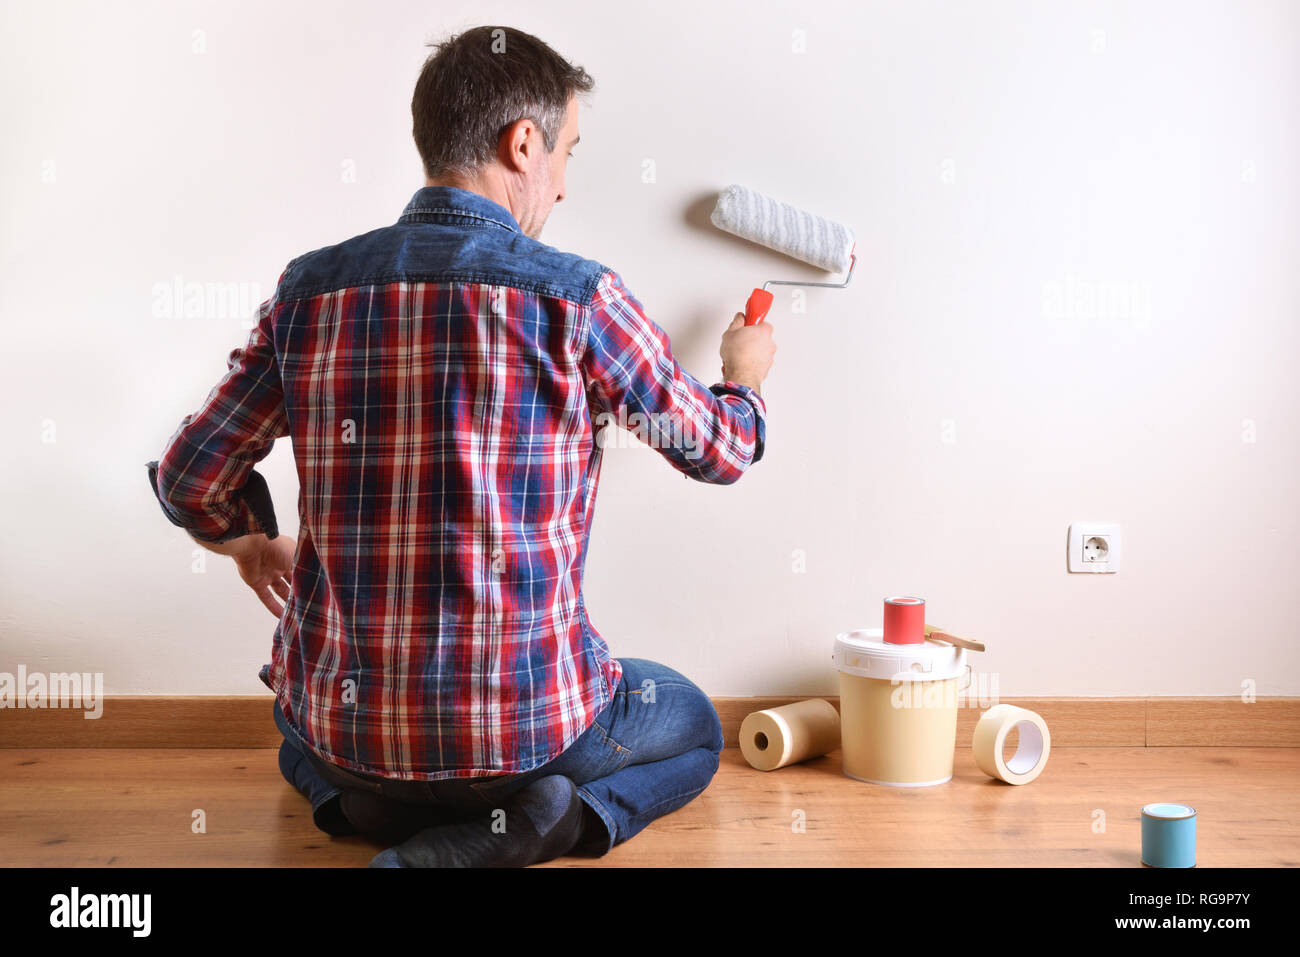 Man kneeling on a parquet floor with paint material painting his house. Front view. Horizontal composition. Stock Photo